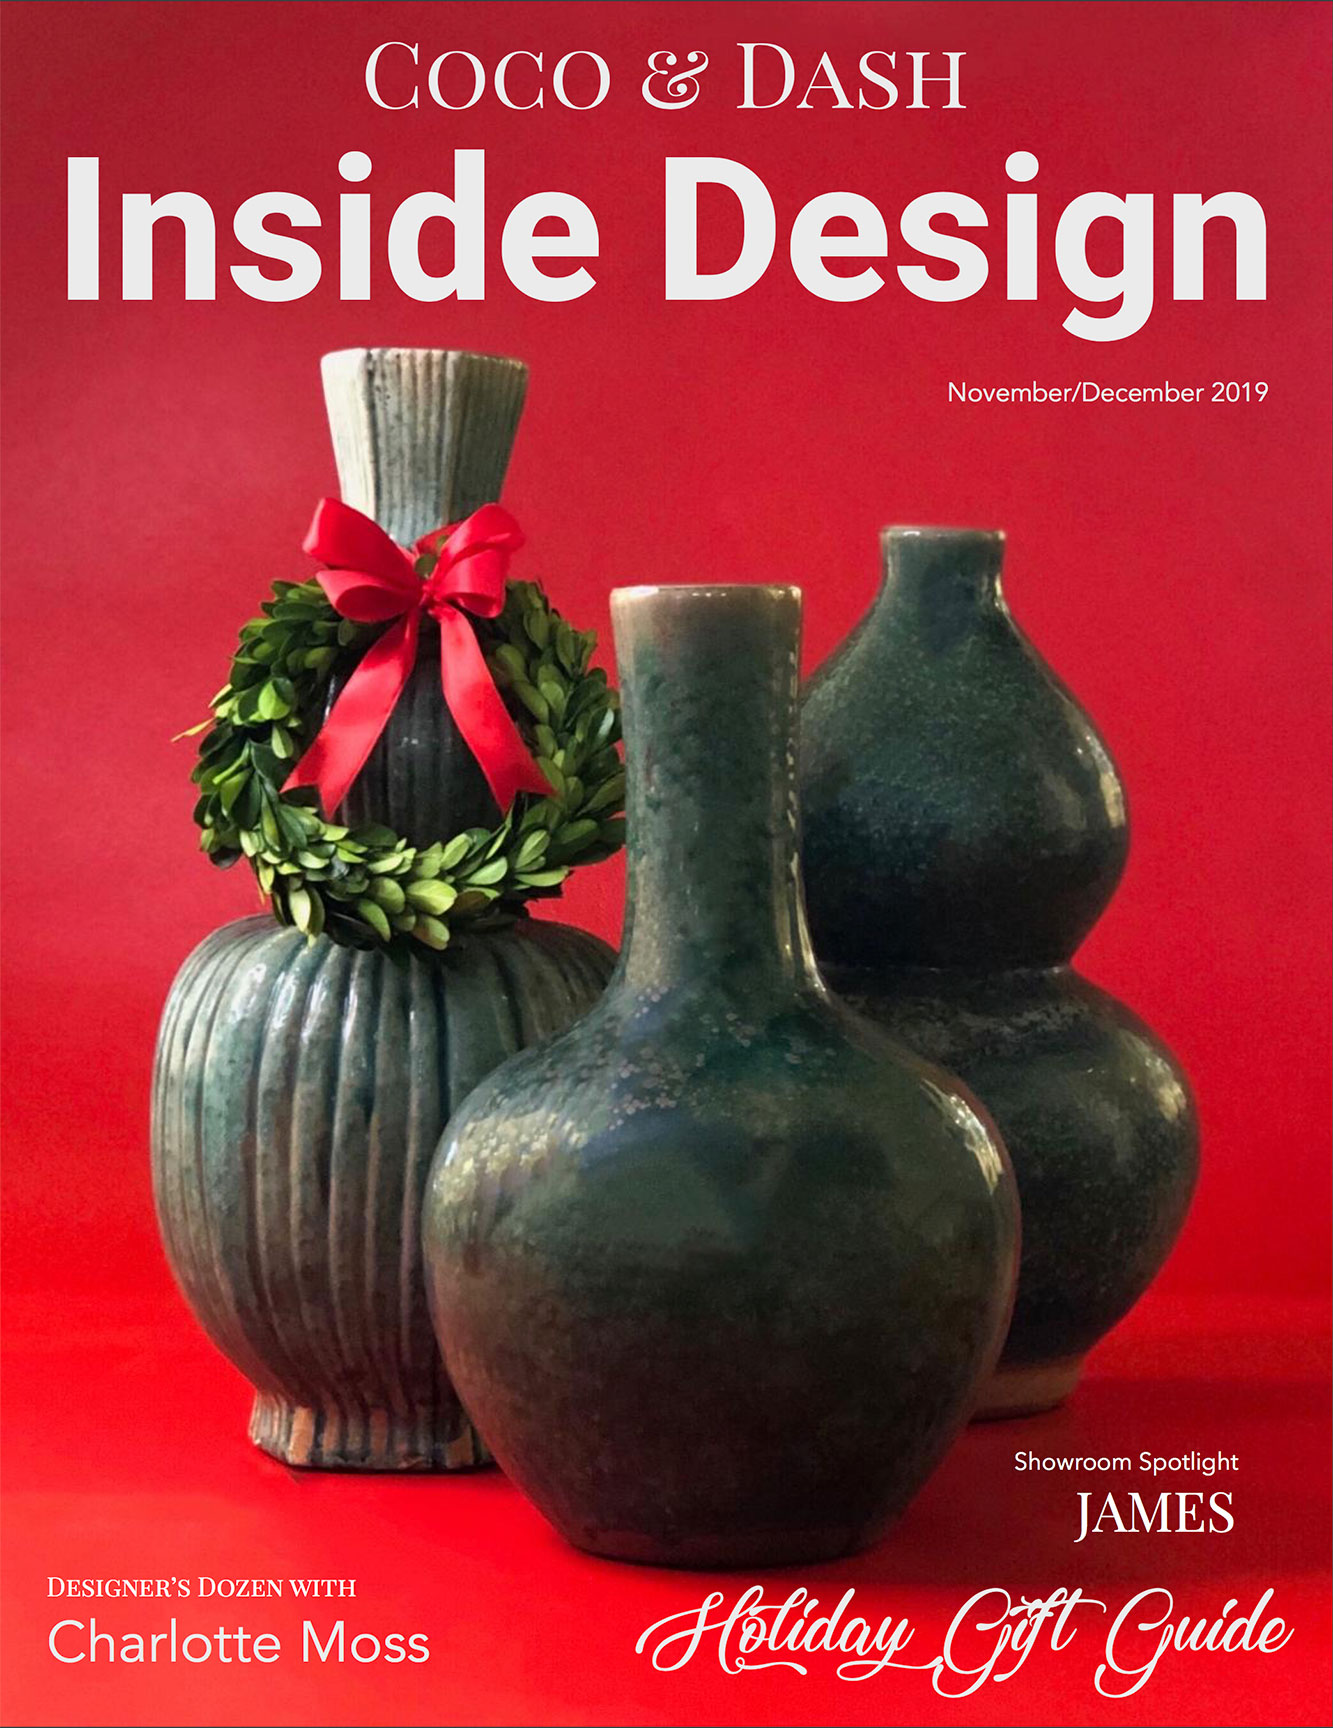 Red Cover of Coco & Dash’s Inside Design